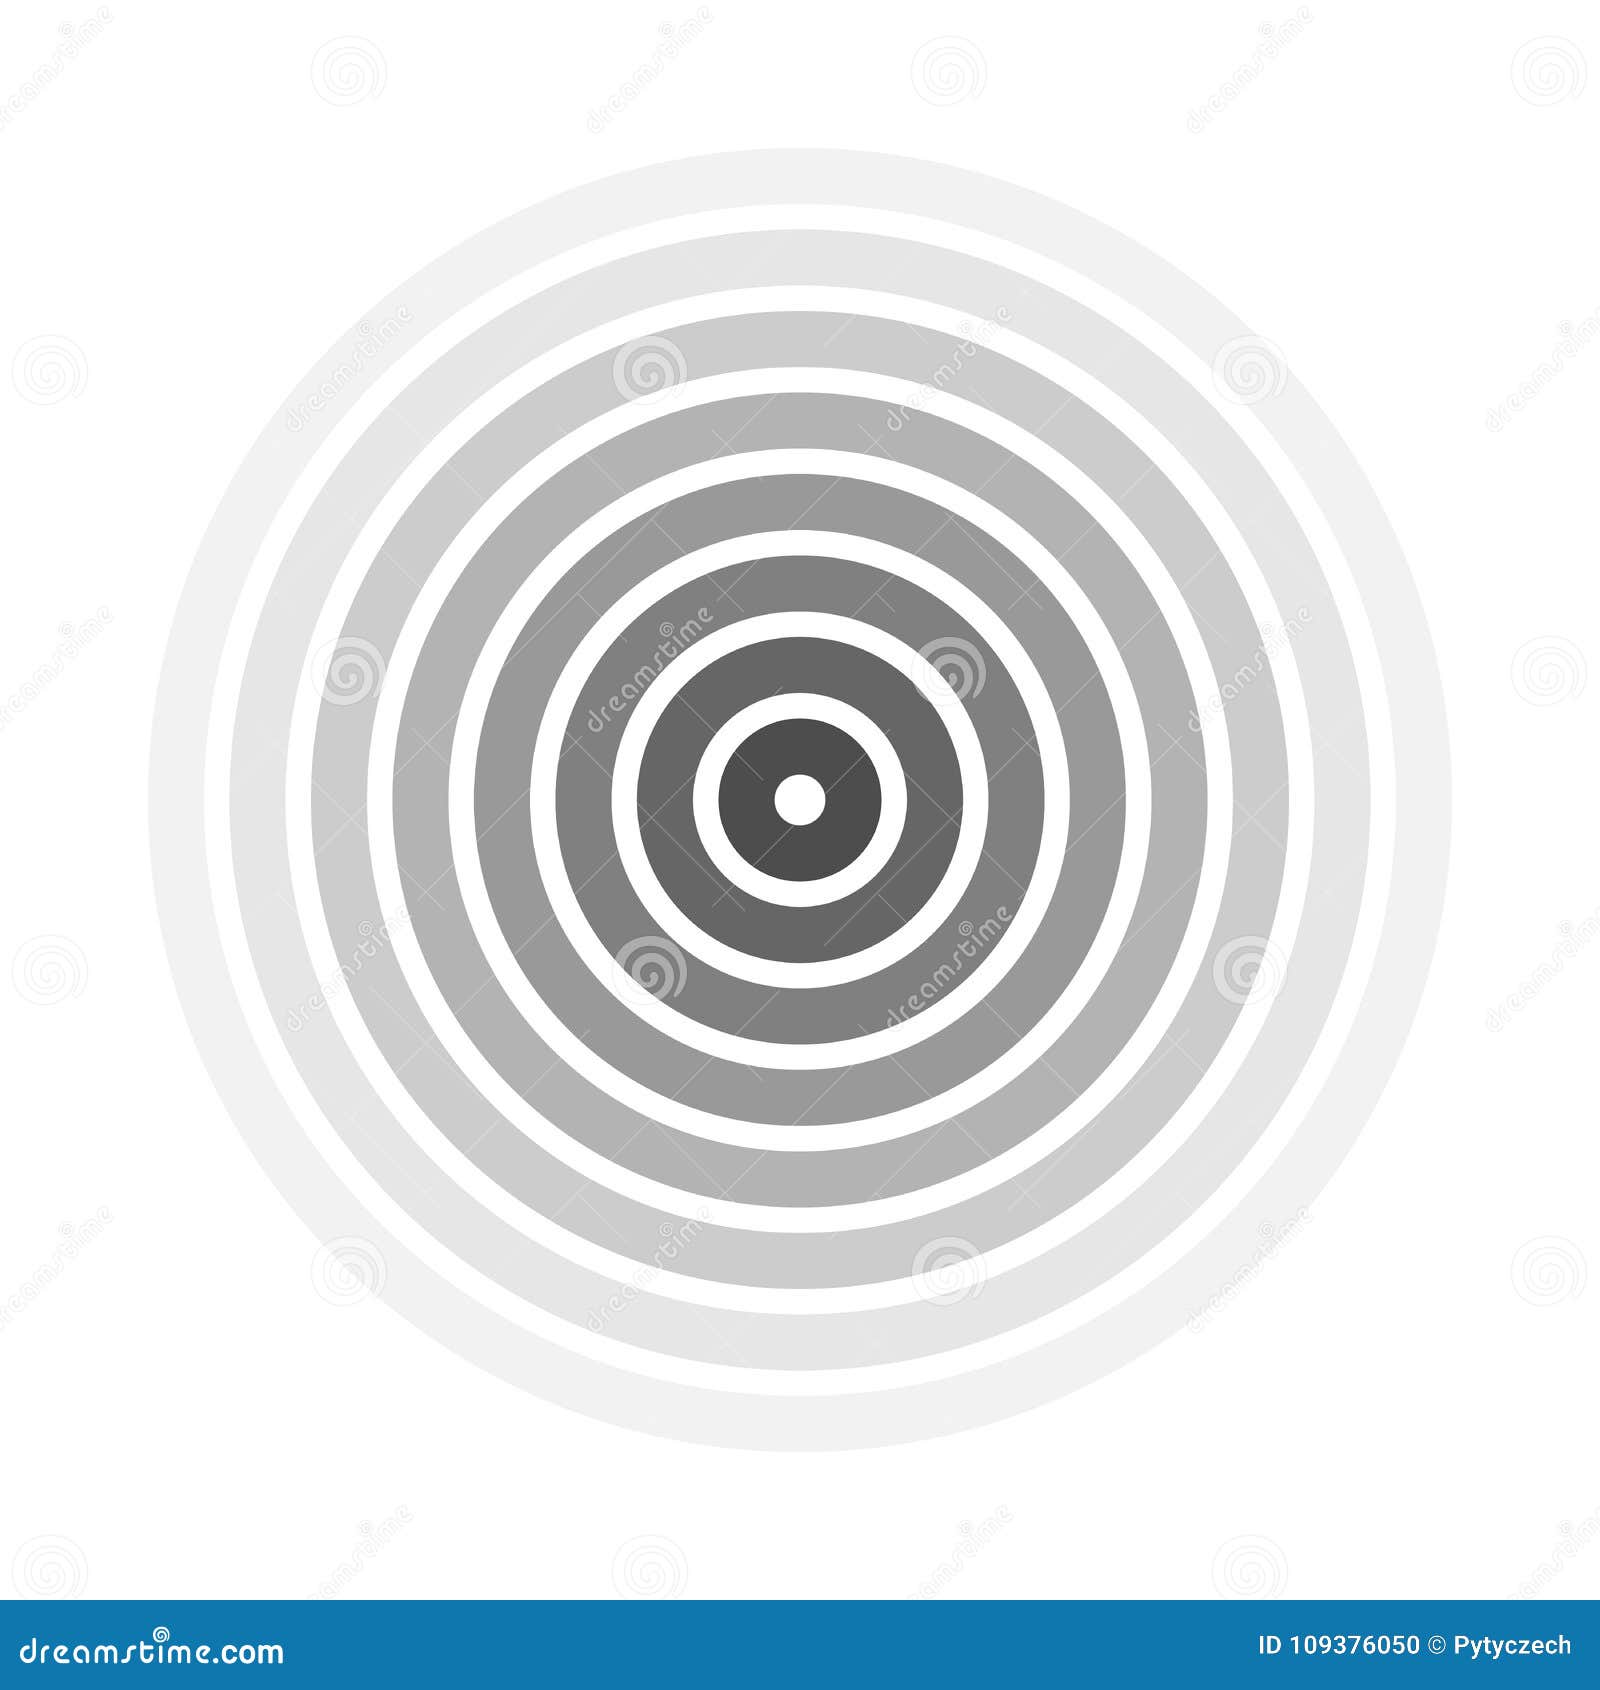 Grey Concentric Rings. Epicenter Theme Stock Vector - Illustration of ...